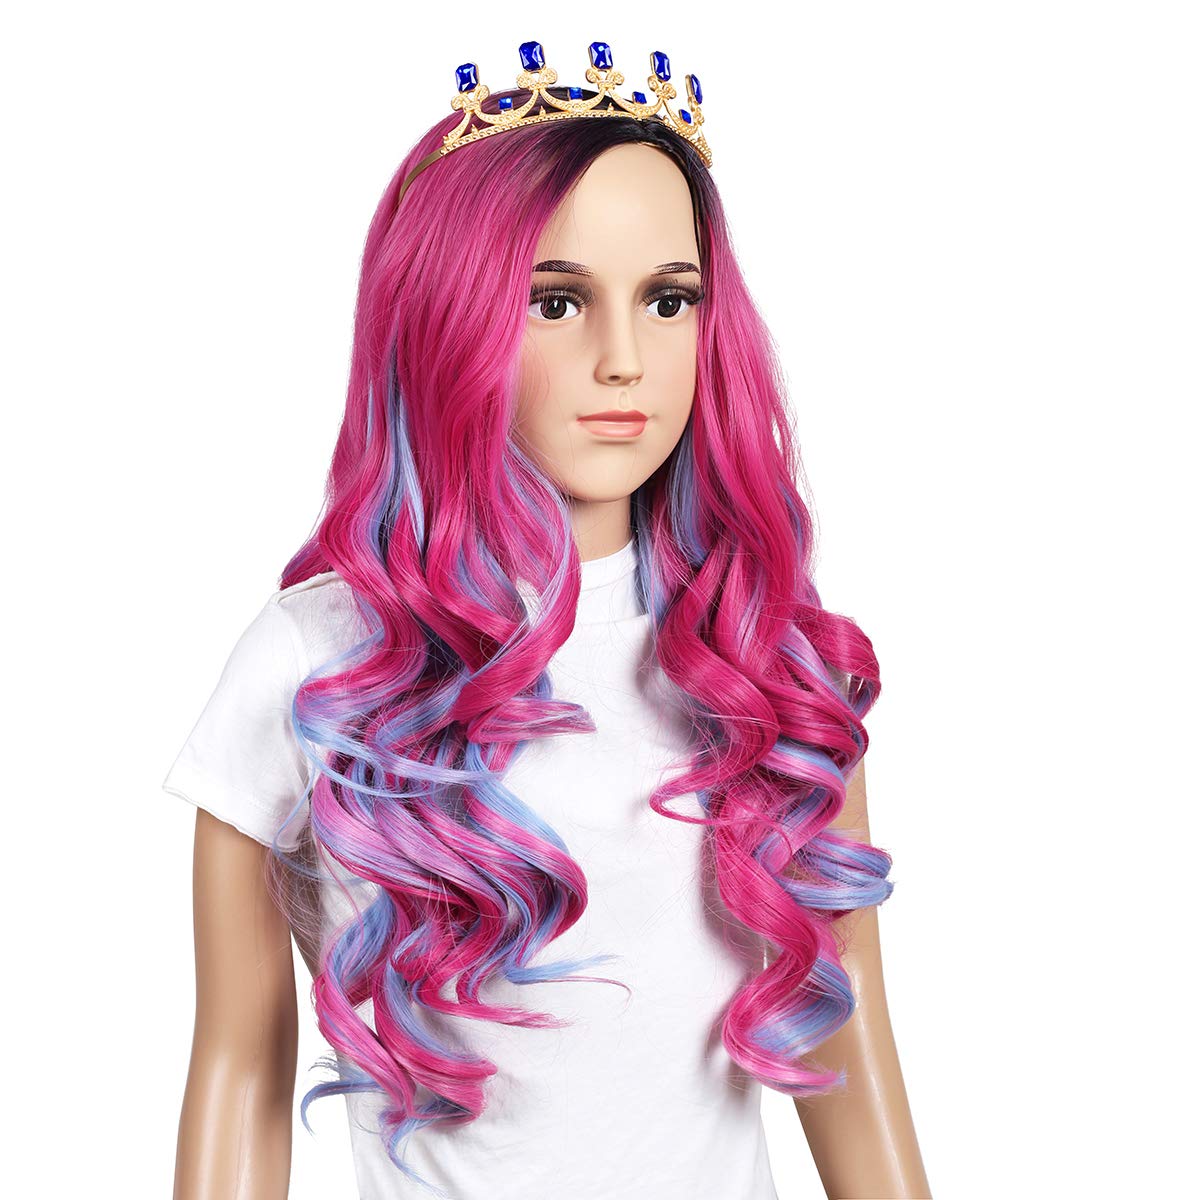 ColorGround Kids Long Wavy Pink and Light Blue Mixed Cosplay Wig with Crown